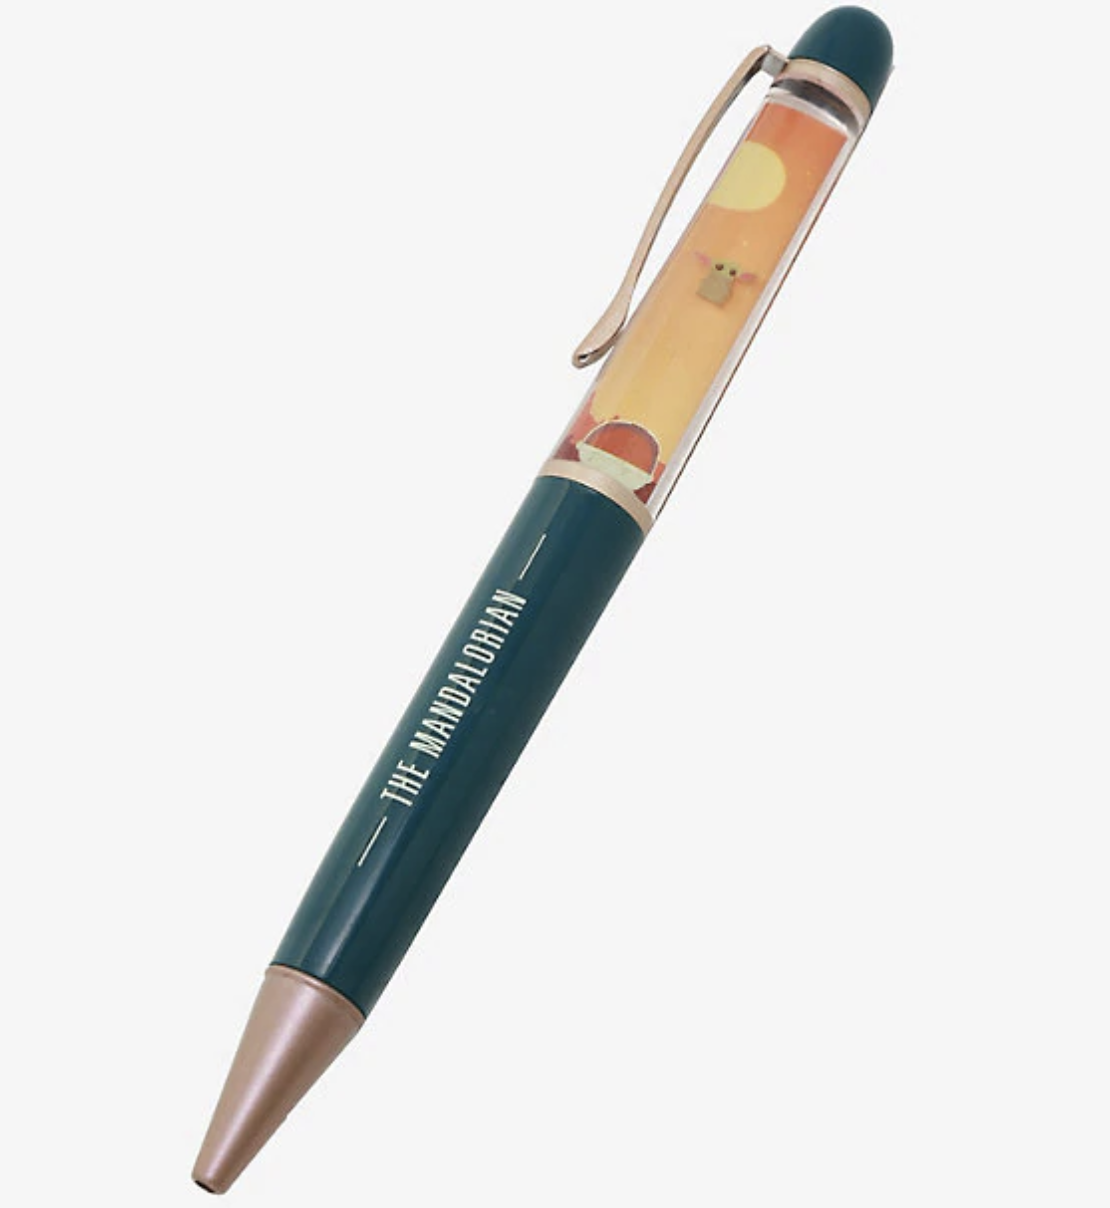 A retractable ballpoint pen that says &quot;The Mandalorian&quot; and has a section at the top filled with a little bit of liquid where a tiny Baby Yoda shaped figure floats around in the pen itself 